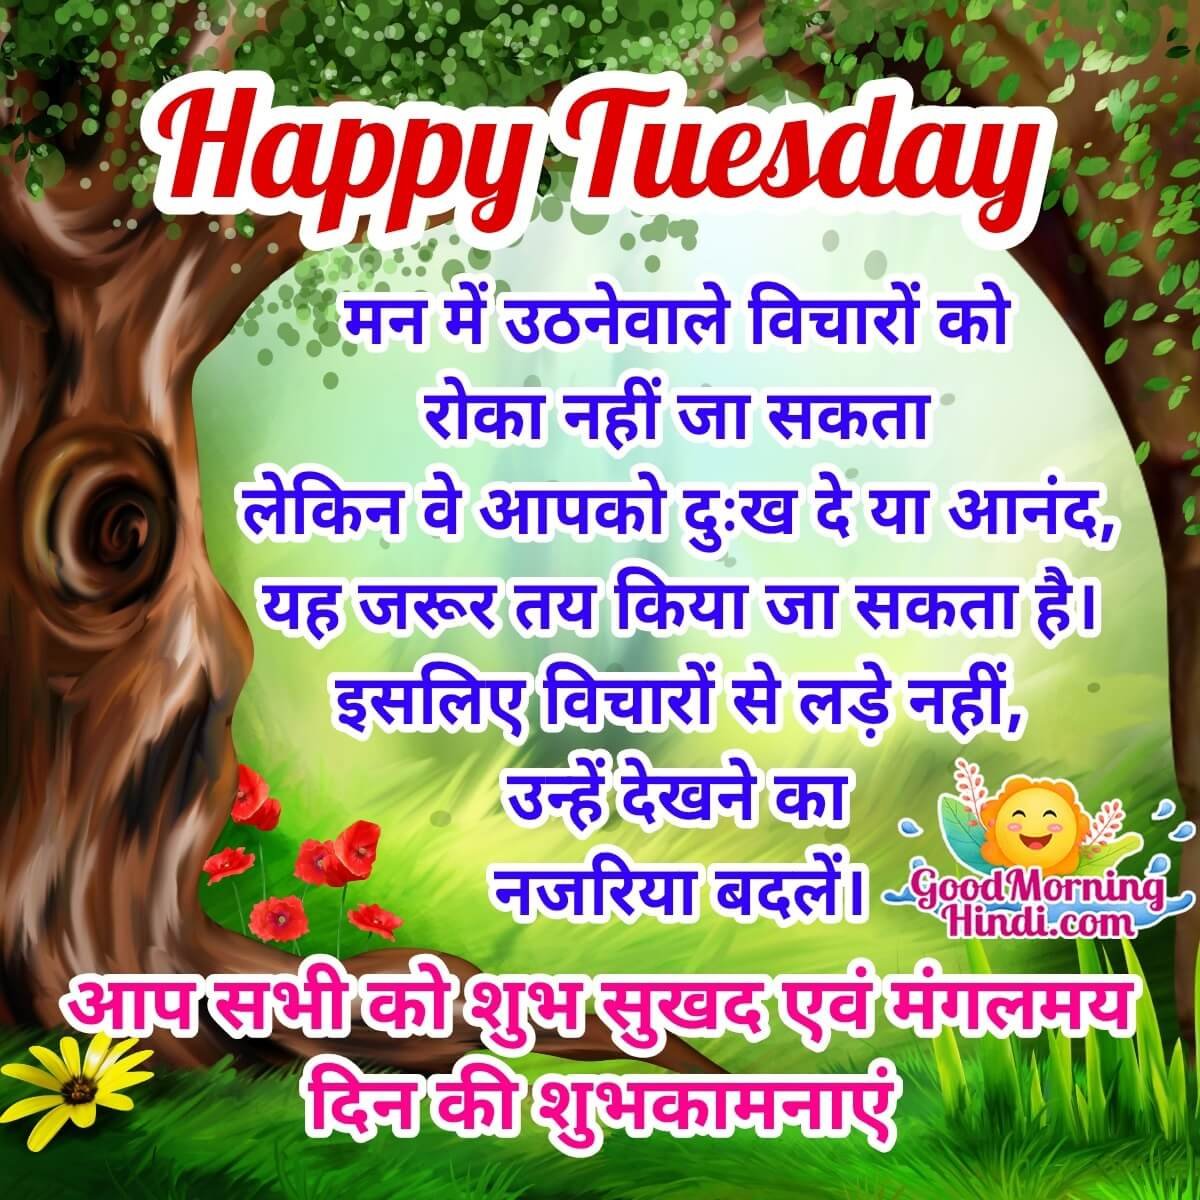 Happy Tuesday Messages In Hindi - Good Morning Wishes & Images In ...